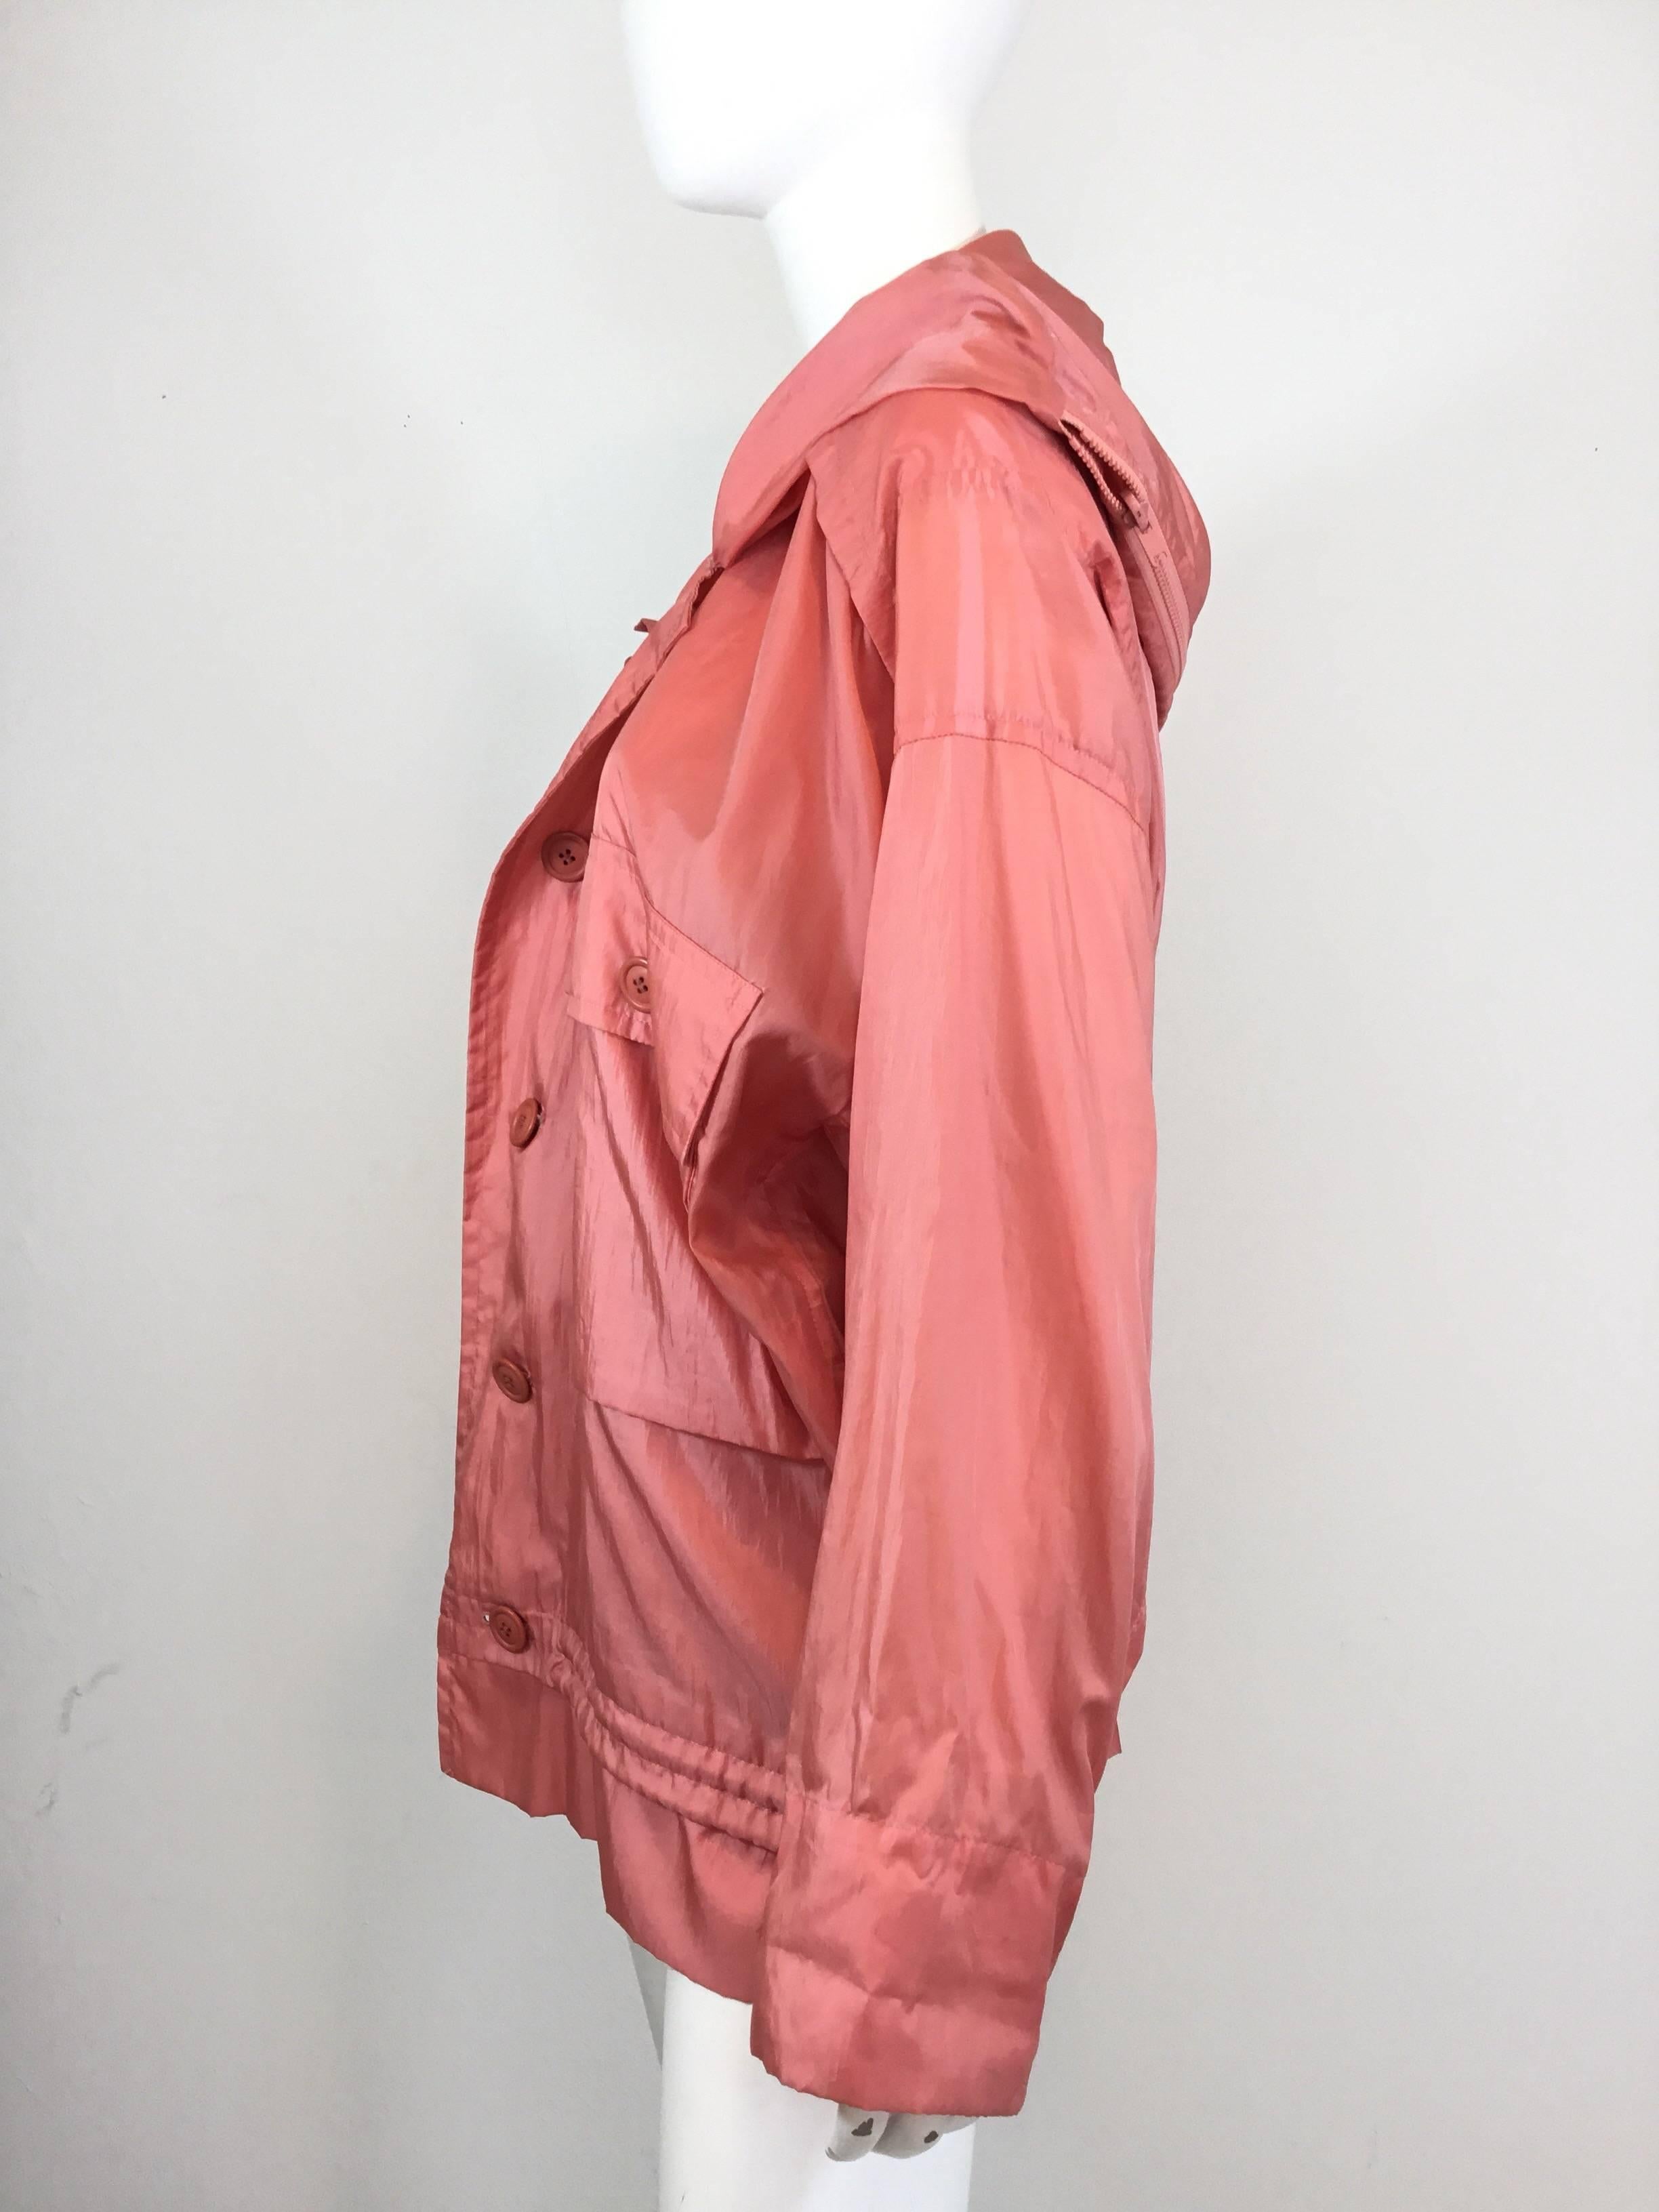 Issey Miyake windbreaker jacket featured in a coral color. Jacket has a zippered front, large buttoned pockets at the bust, interior drawstring at the waist, and a hood in which has a zipper fastening to fold and store jacket inside. Labeled size S,